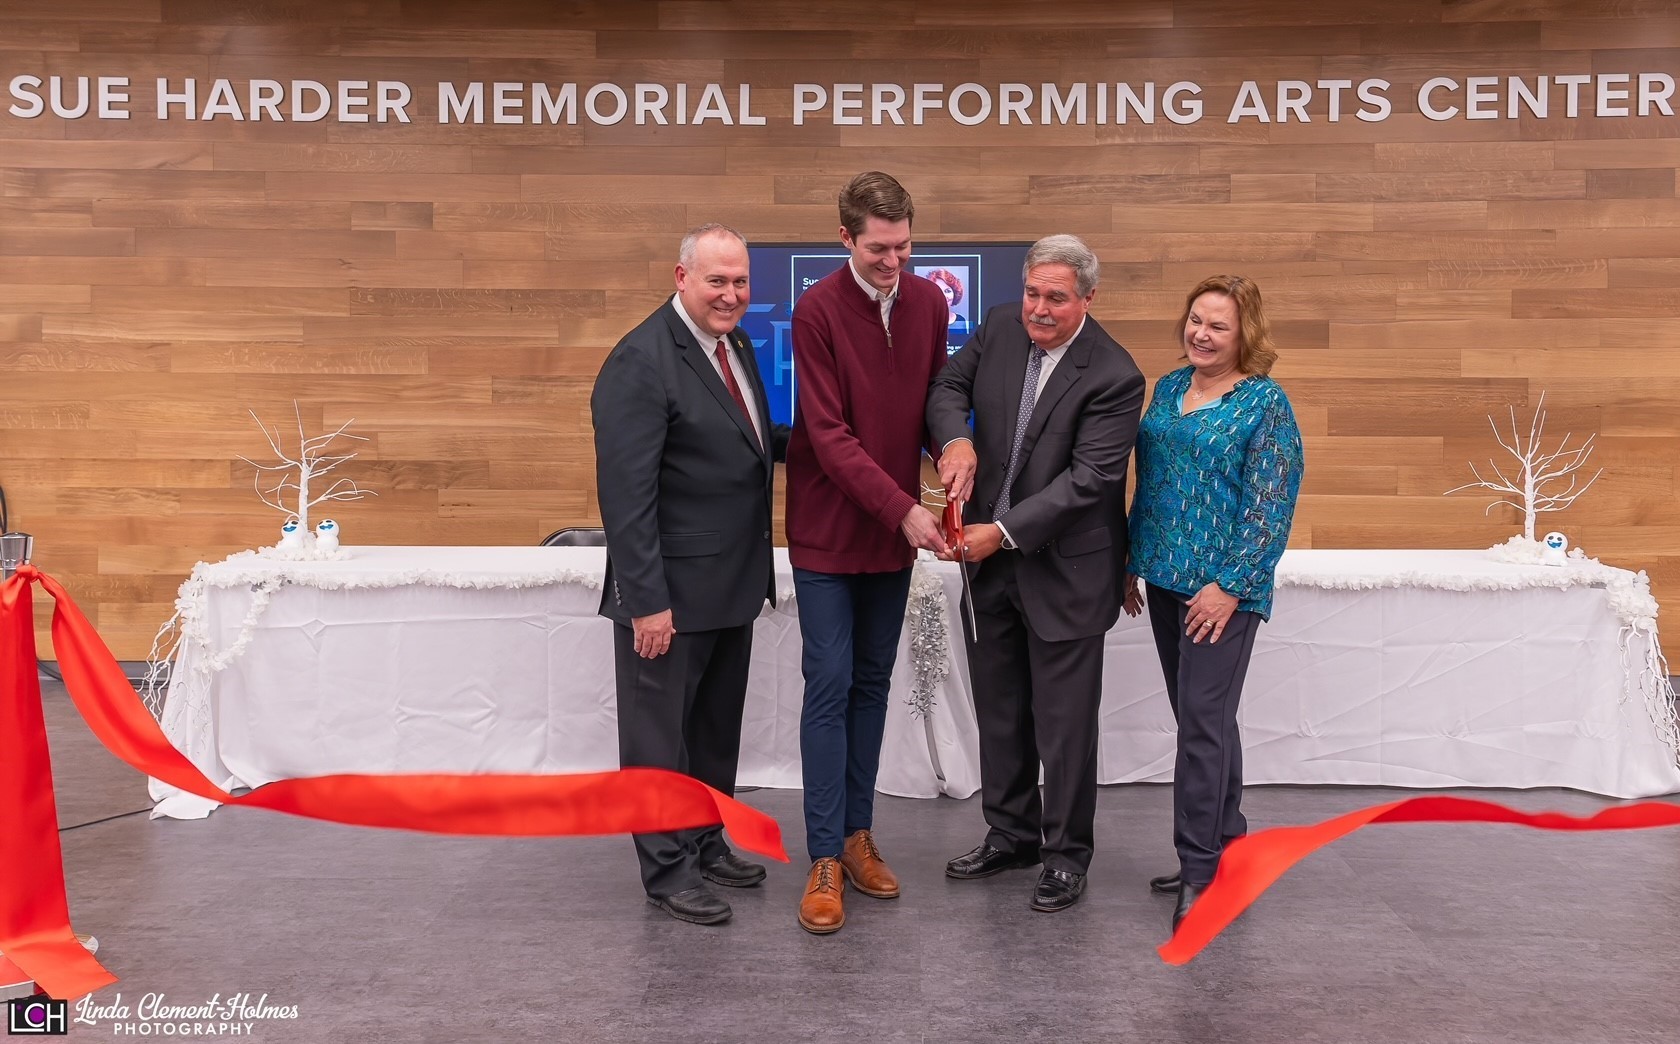 ribbon cutting of new performing arts center